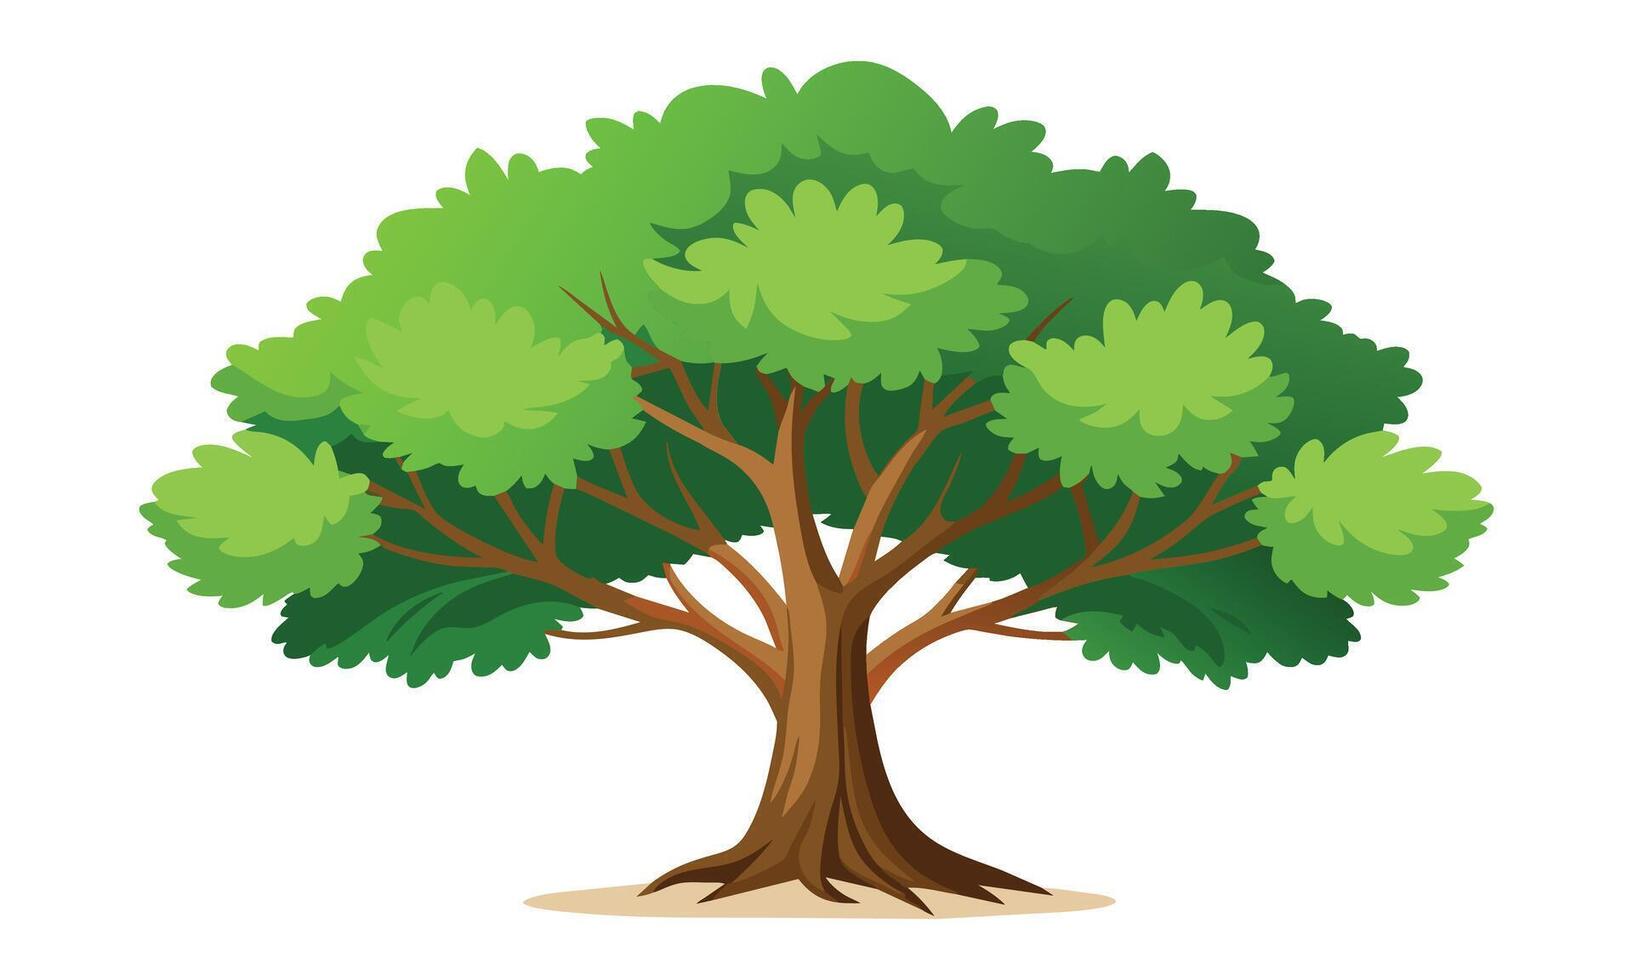 Sycamore tree isolated flat illustration on white background. vector